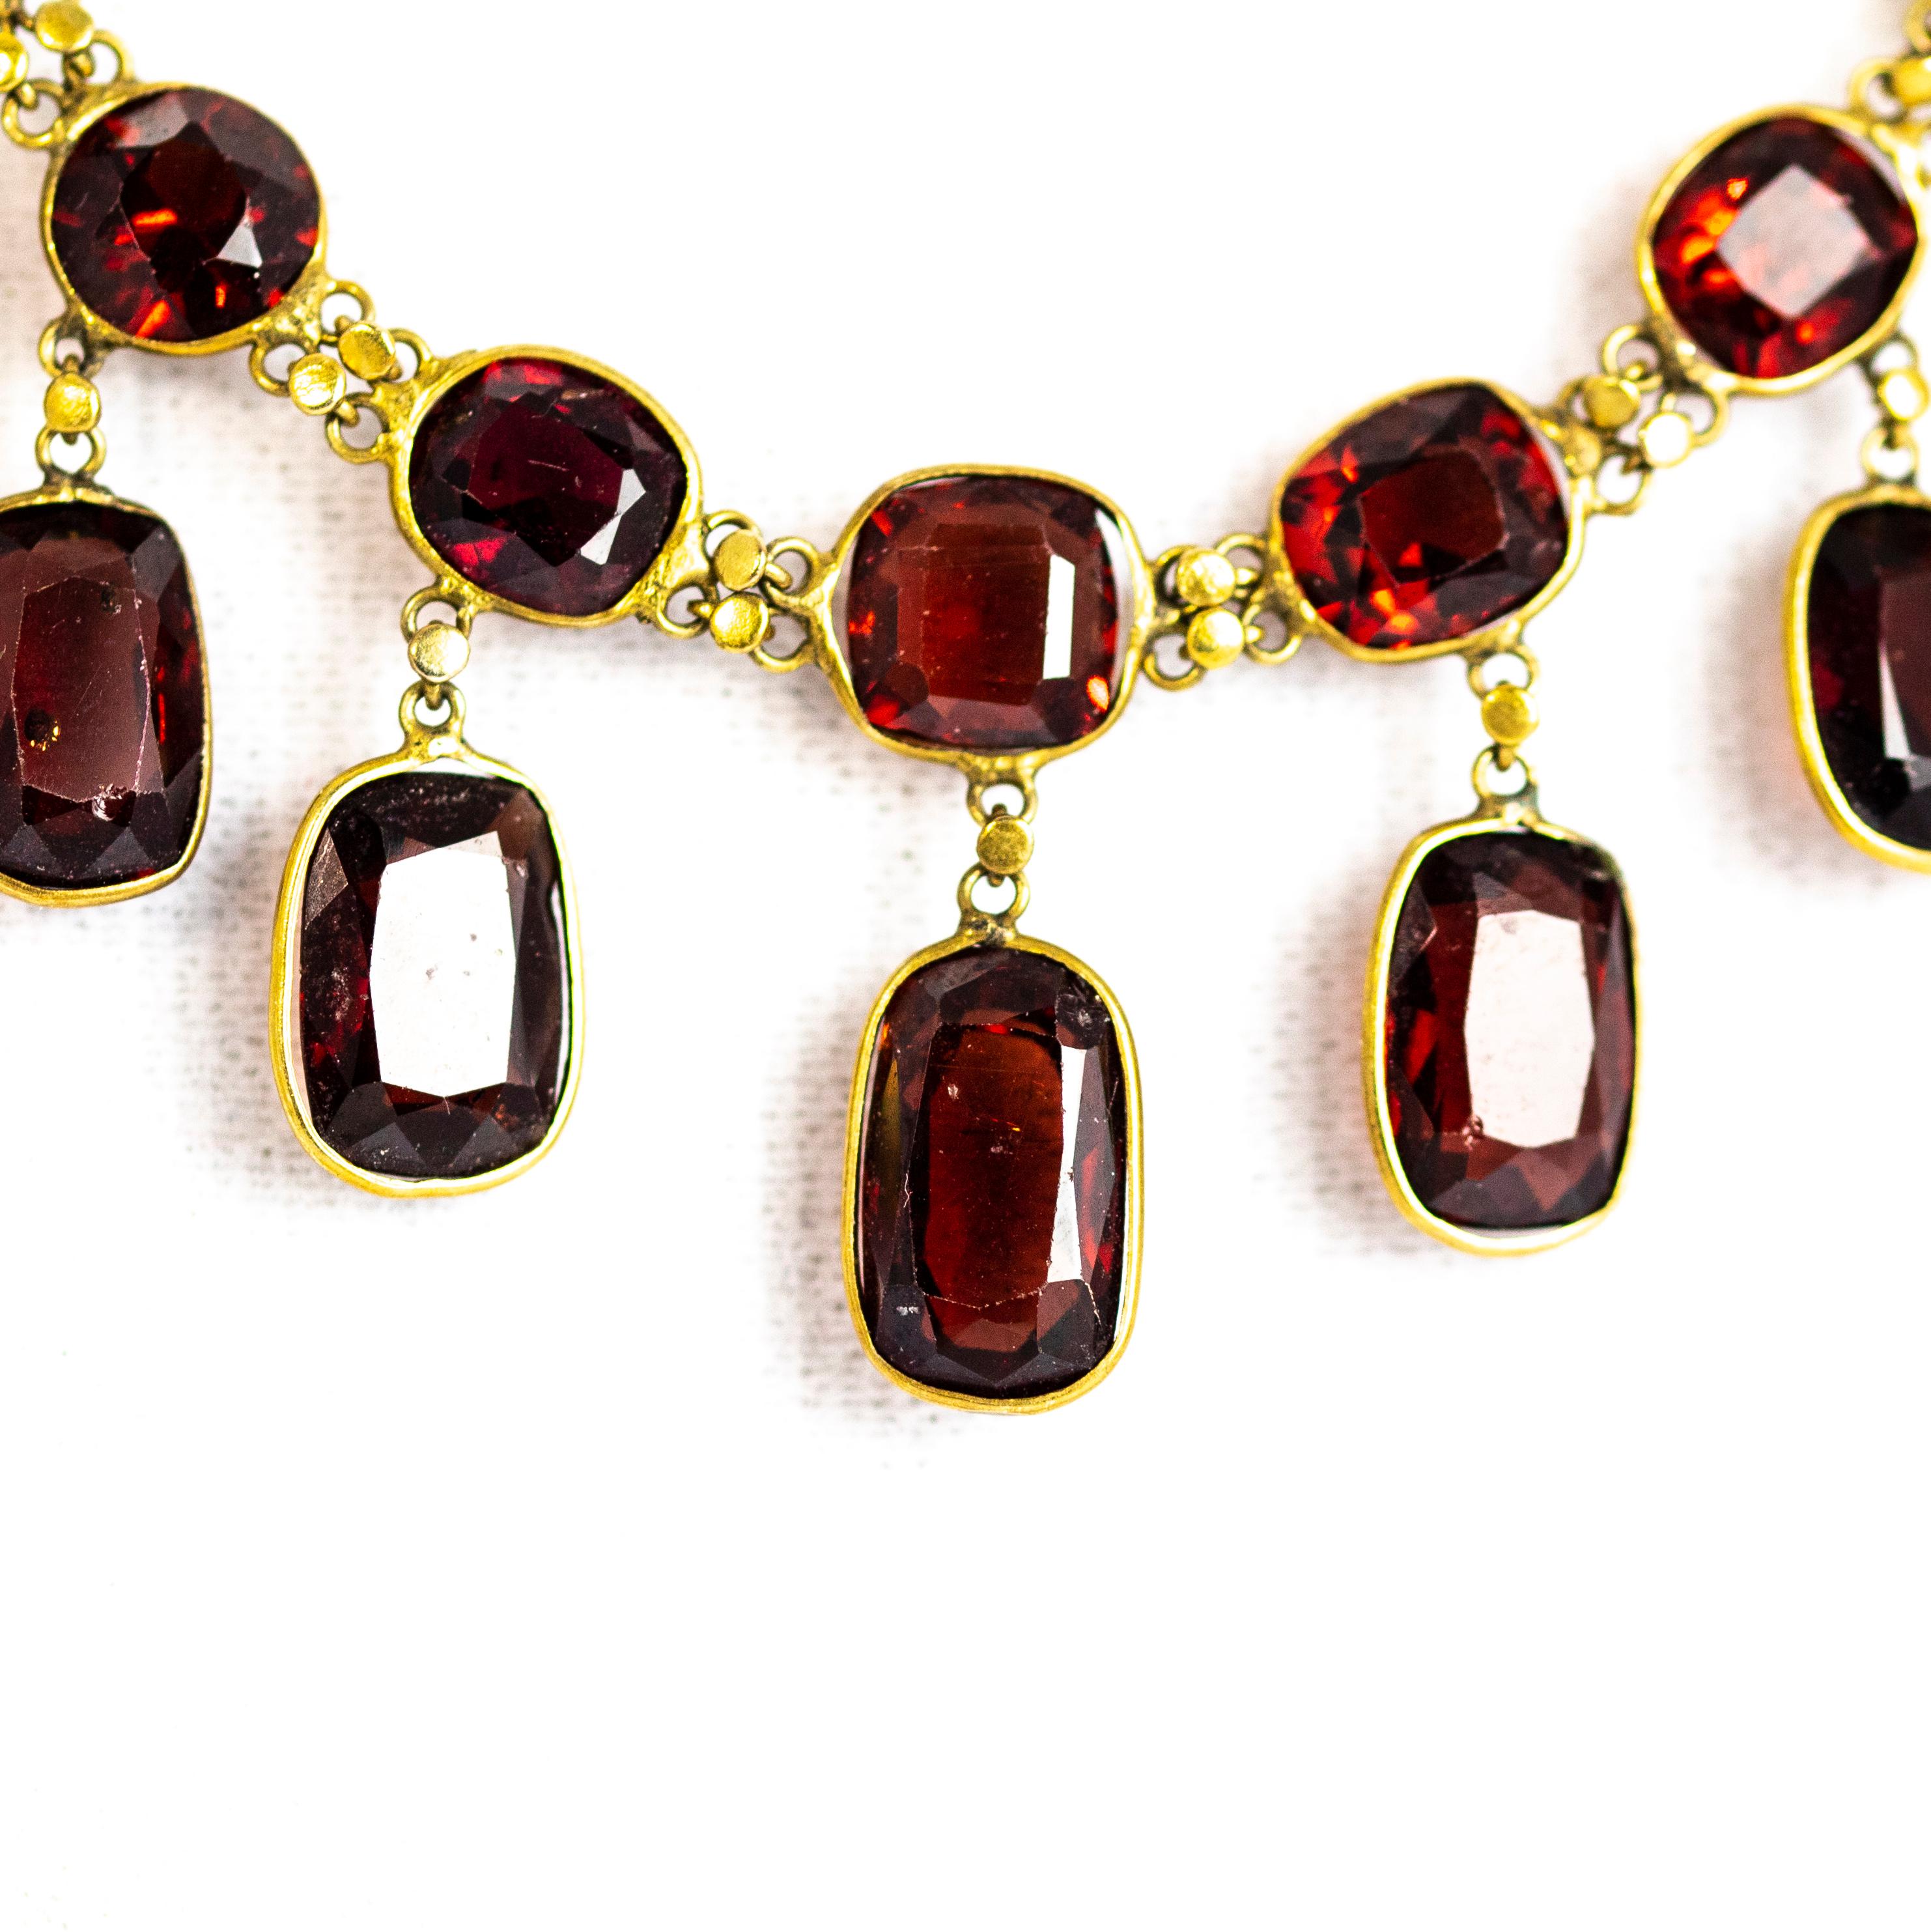 Stunning garnet necklace which holds a row of the deep red sparkling stones and each one of these stones had a drop attached to it. This fringe style necklace is a lovely length and sits flat to the skin.

Length: 16inches